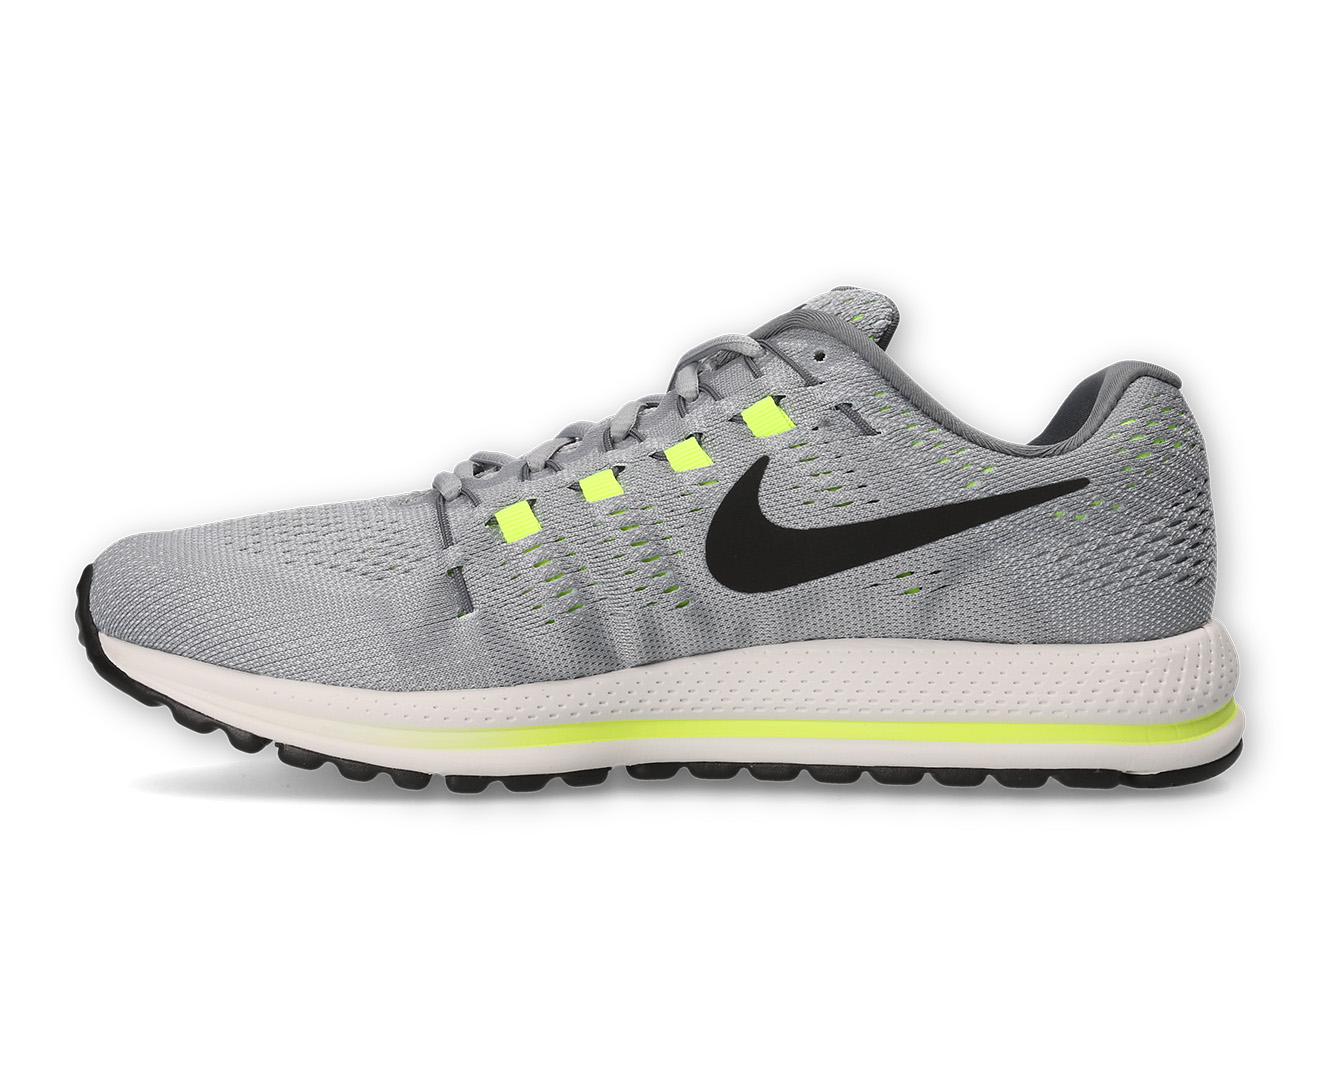 nike men's air zoom vomero 12 running shoes